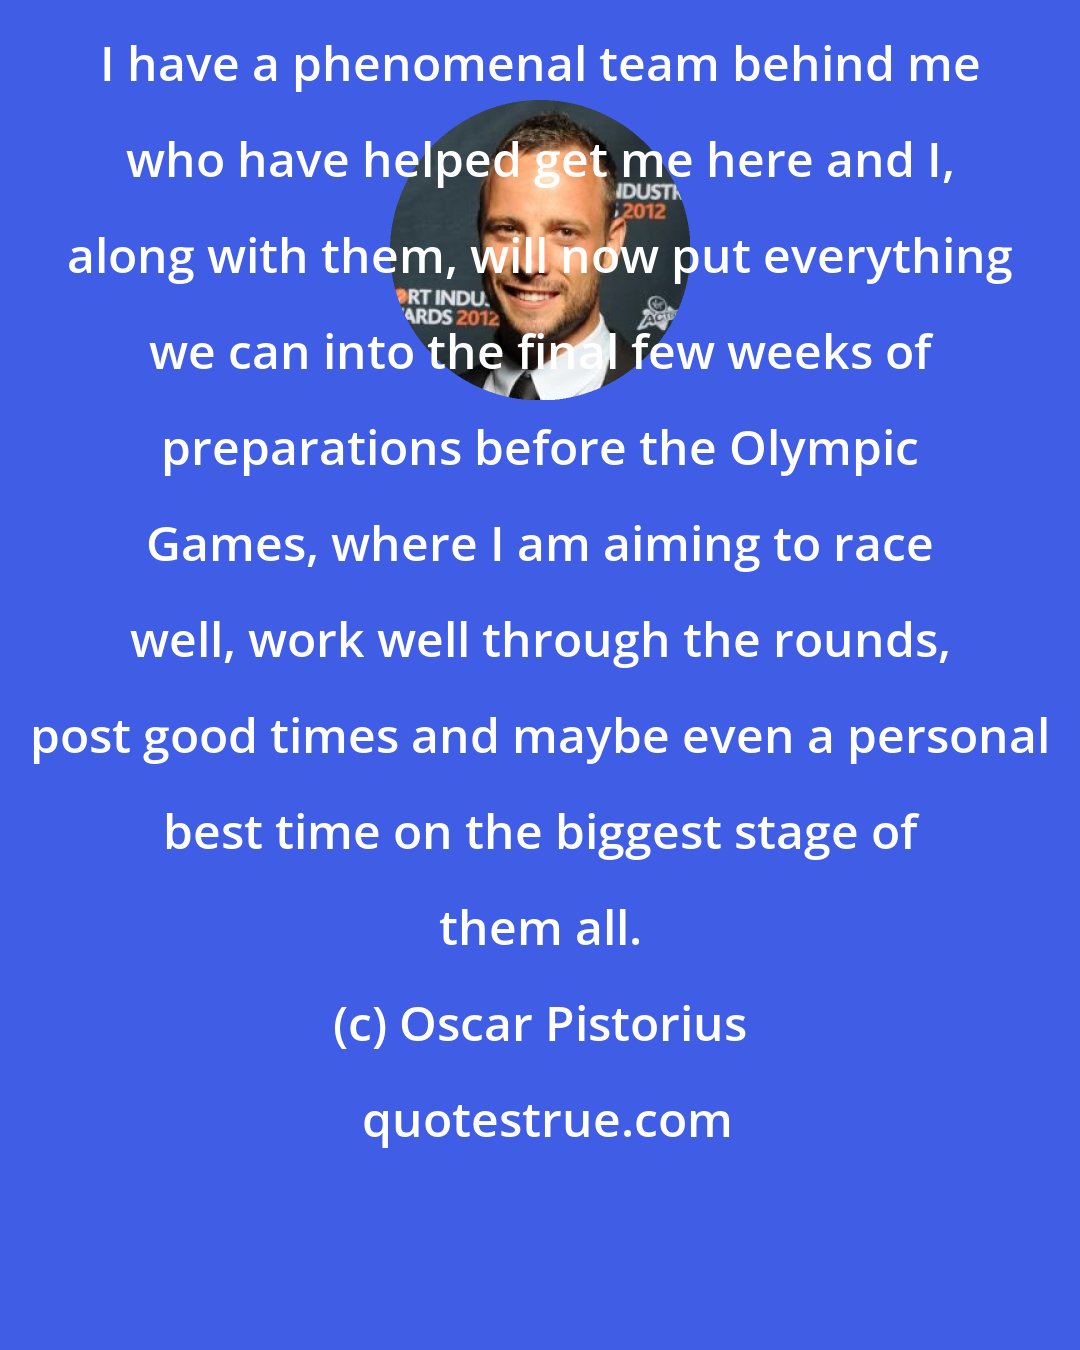 Oscar Pistorius: I have a phenomenal team behind me who have helped get me here and I, along with them, will now put everything we can into the final few weeks of preparations before the Olympic Games, where I am aiming to race well, work well through the rounds, post good times and maybe even a personal best time on the biggest stage of them all.